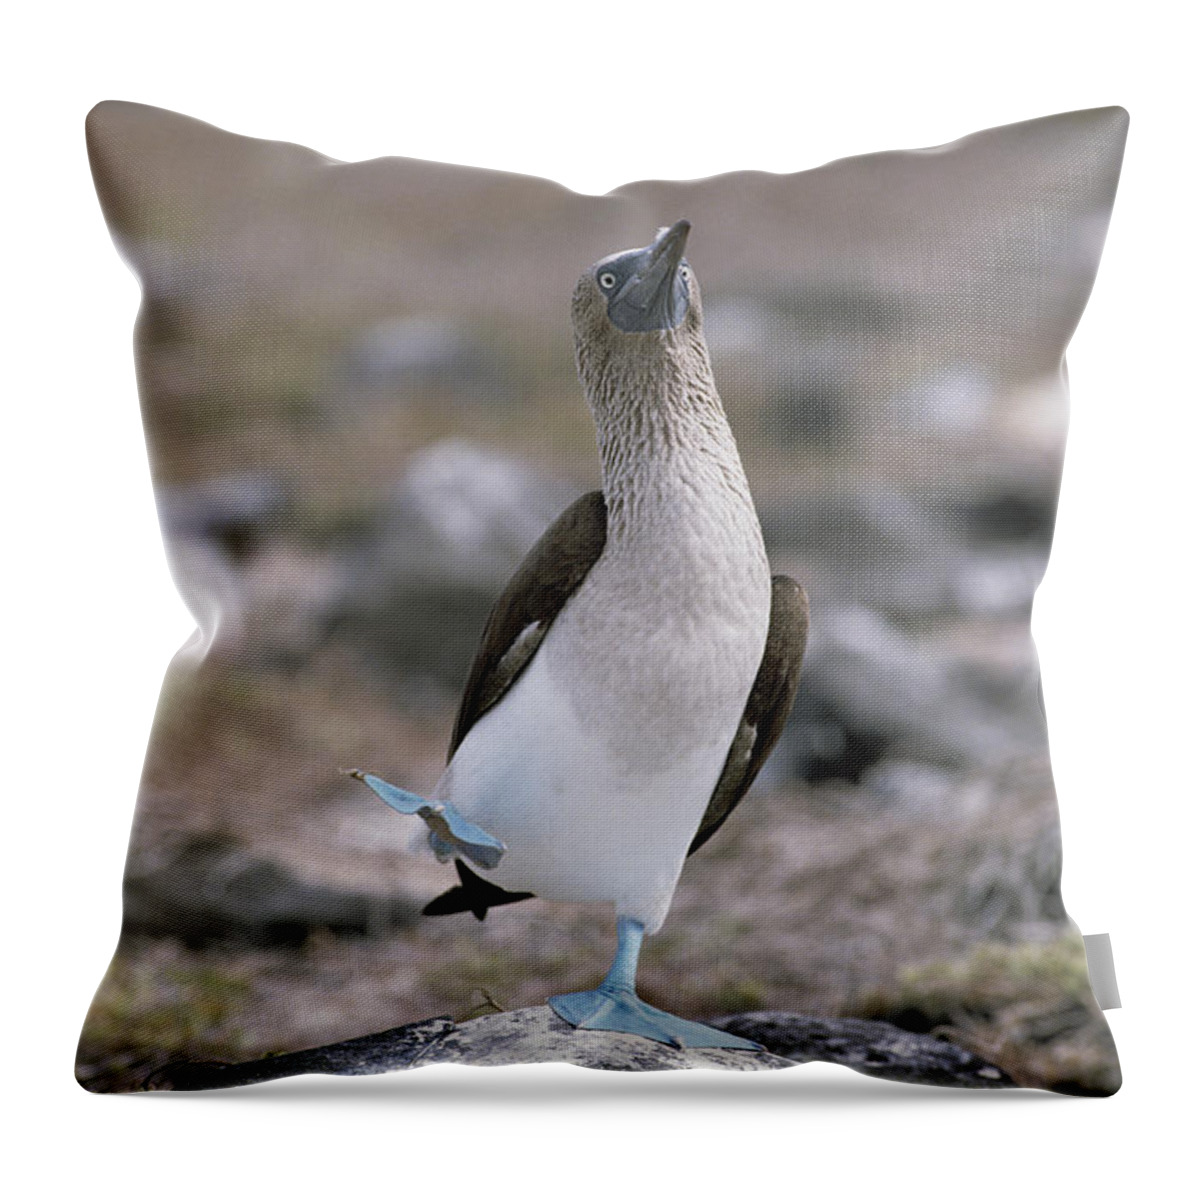 Feb0514 Throw Pillow featuring the photograph Blue-footed Booby In Courtship Dance by Konrad Wothe